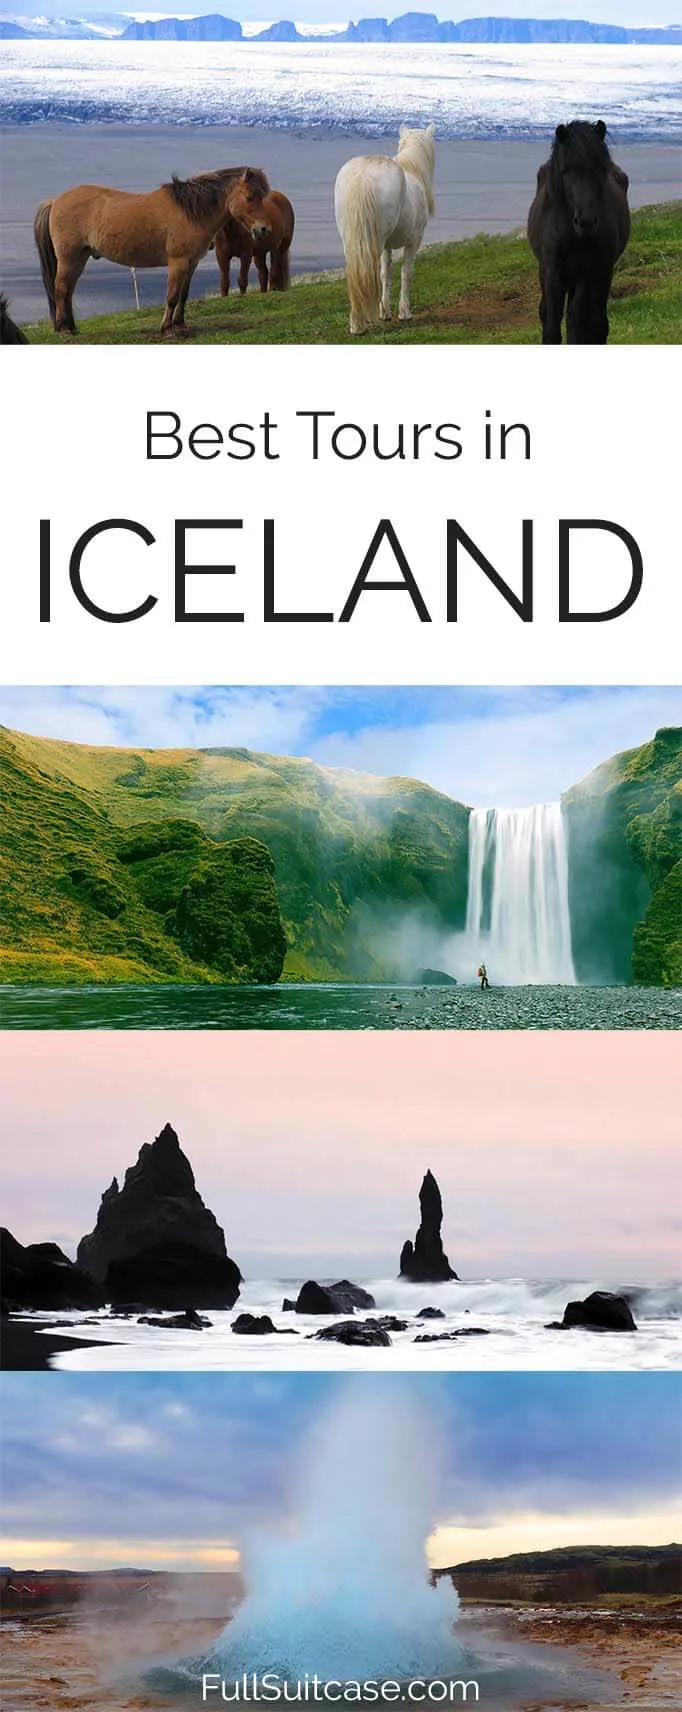 Best guided tours and day trips in Iceland